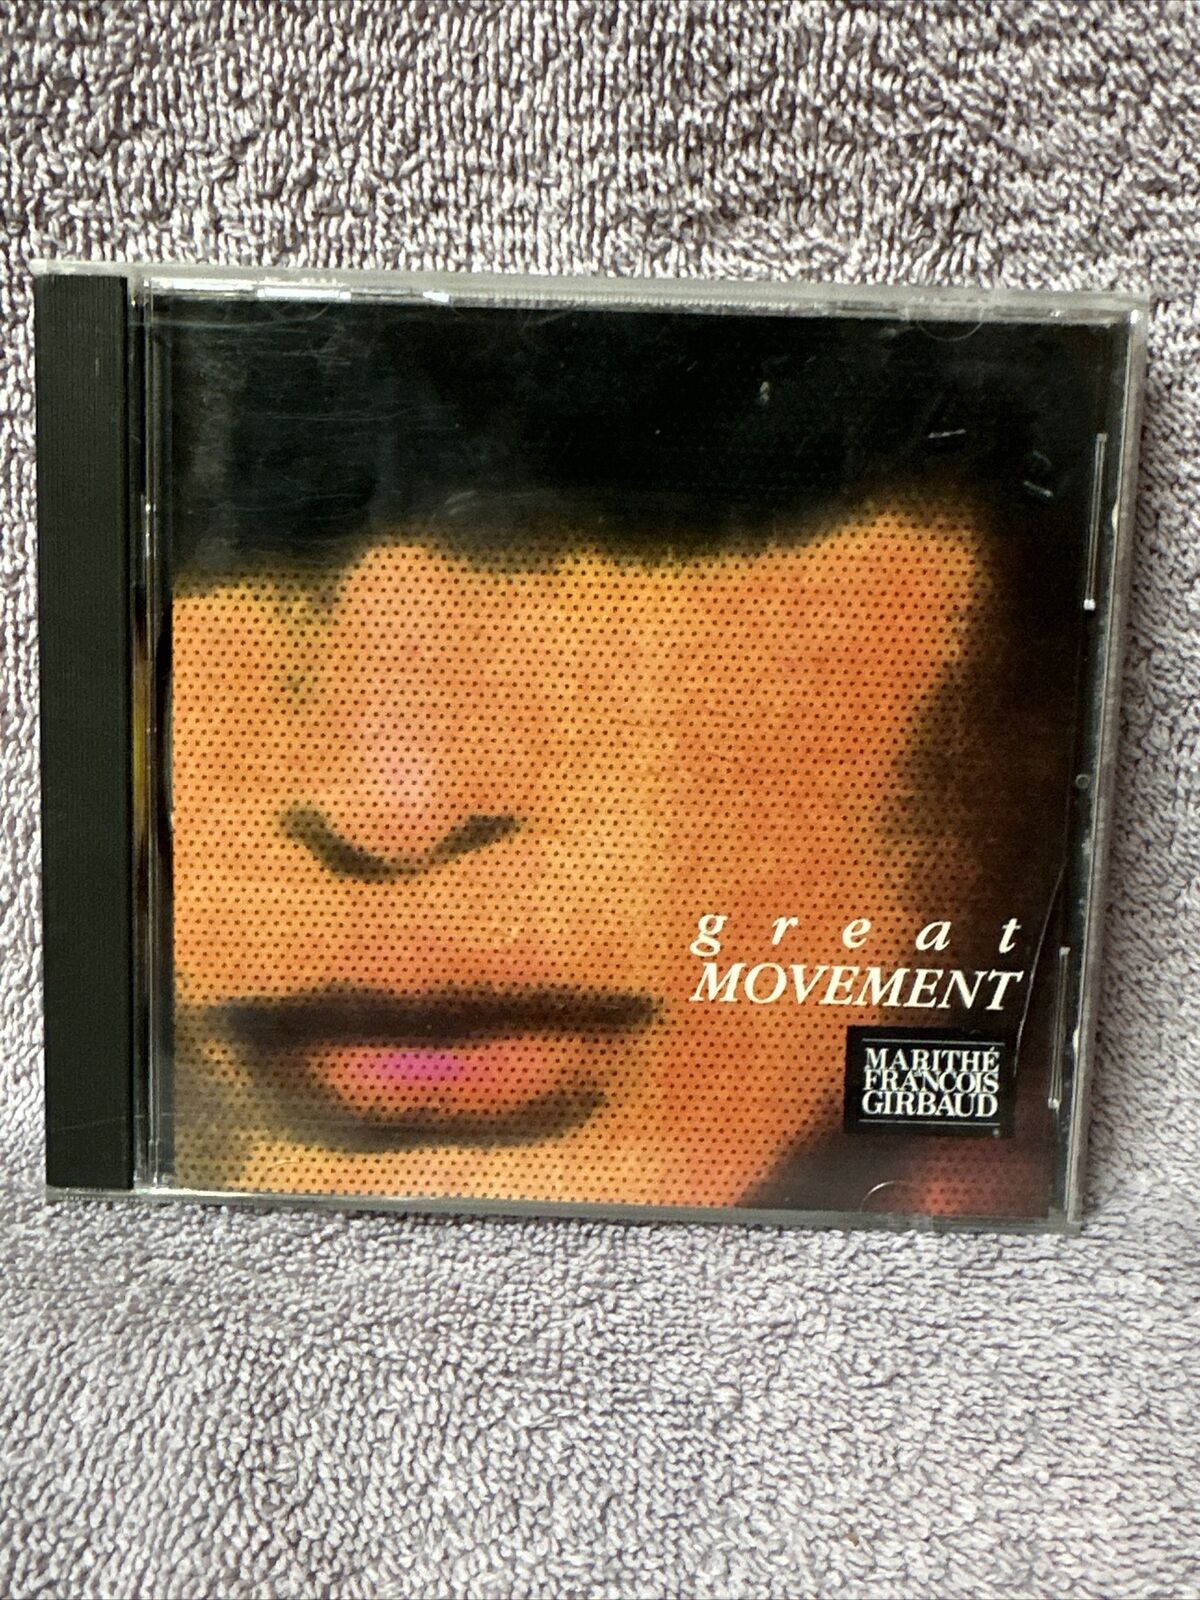 Great Movement - Marithé François Girbaud by Various (CD)